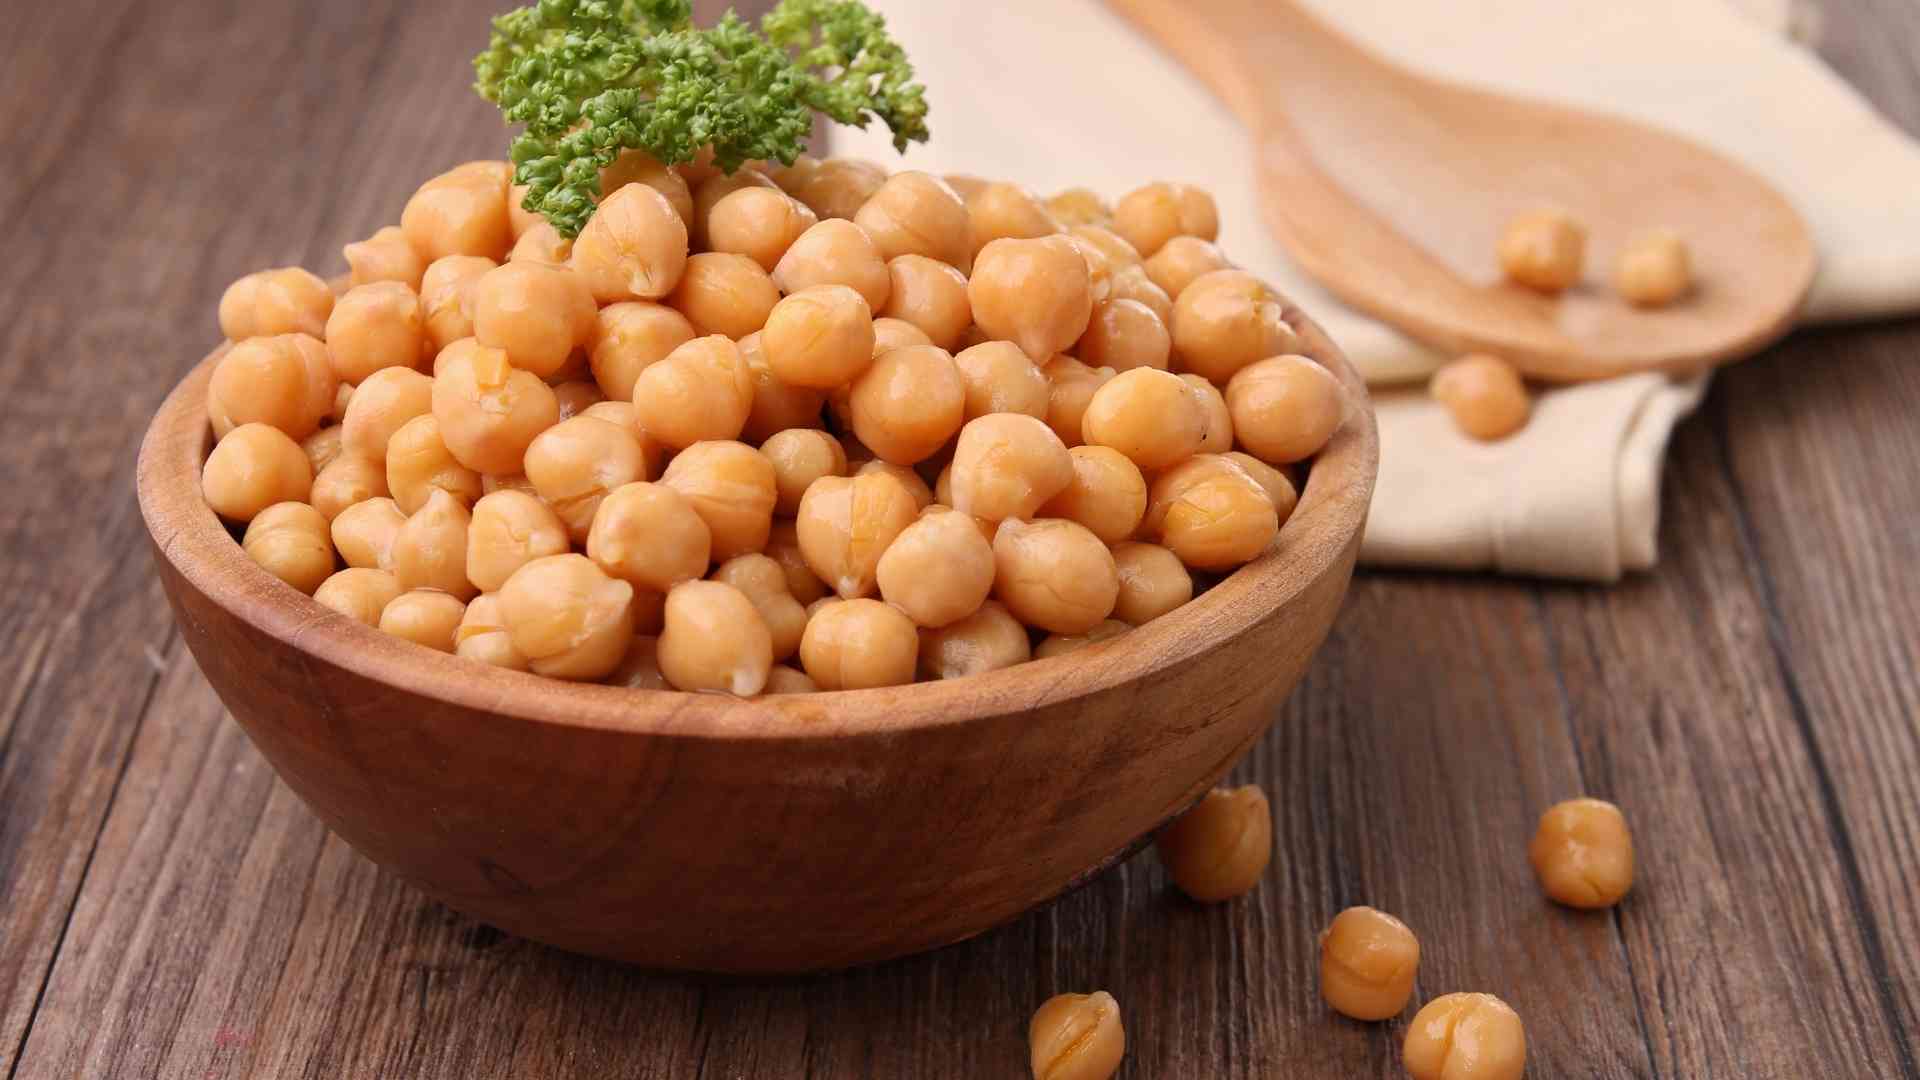 Chickpeas Benefits – 12 Reasons To Start Eating Chickpeas Every Day